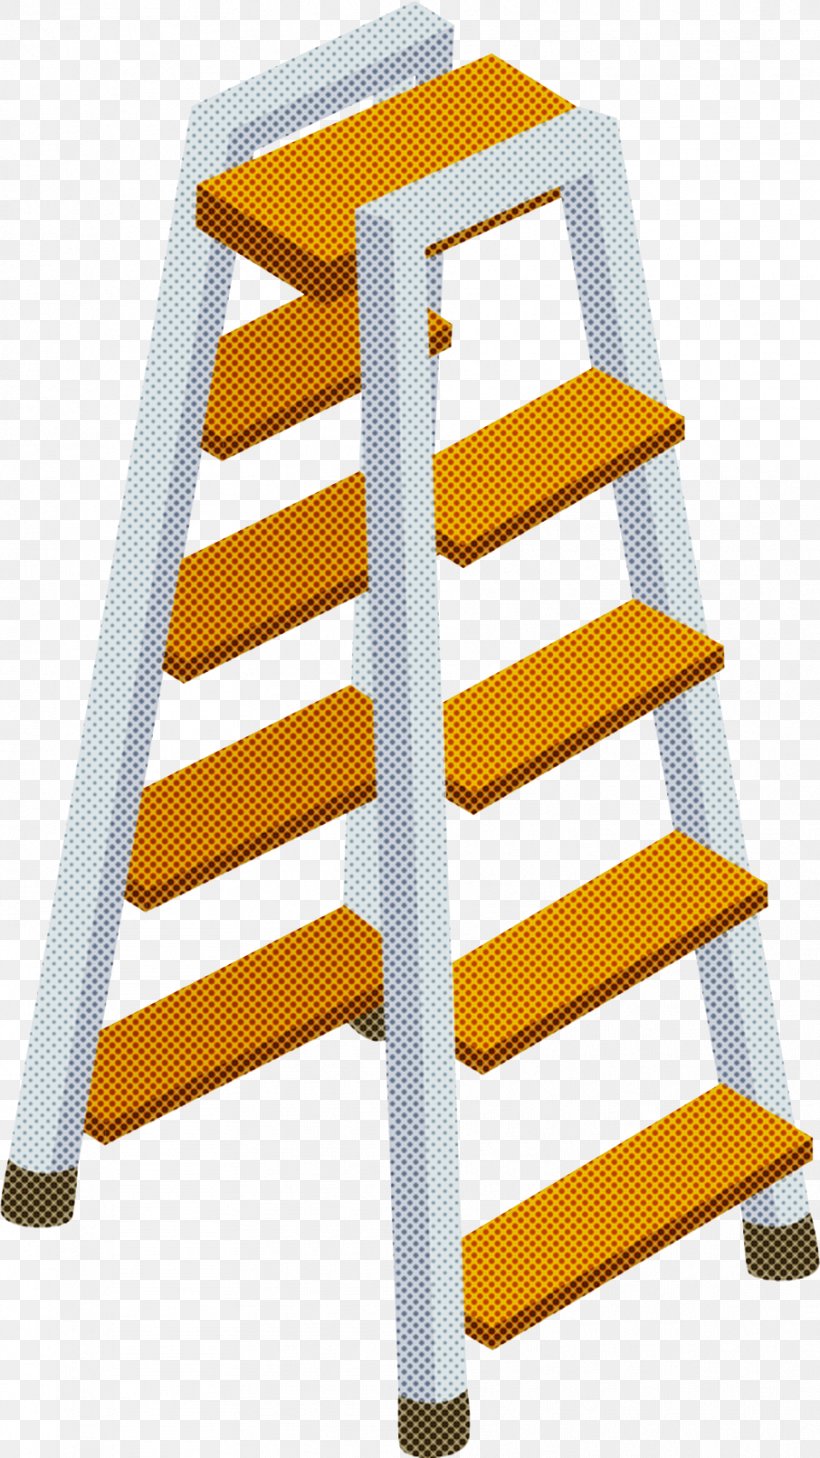 Stairs Yellow Ladder, PNG, 906x1612px, Stairs, Ladder, Yellow Download Free